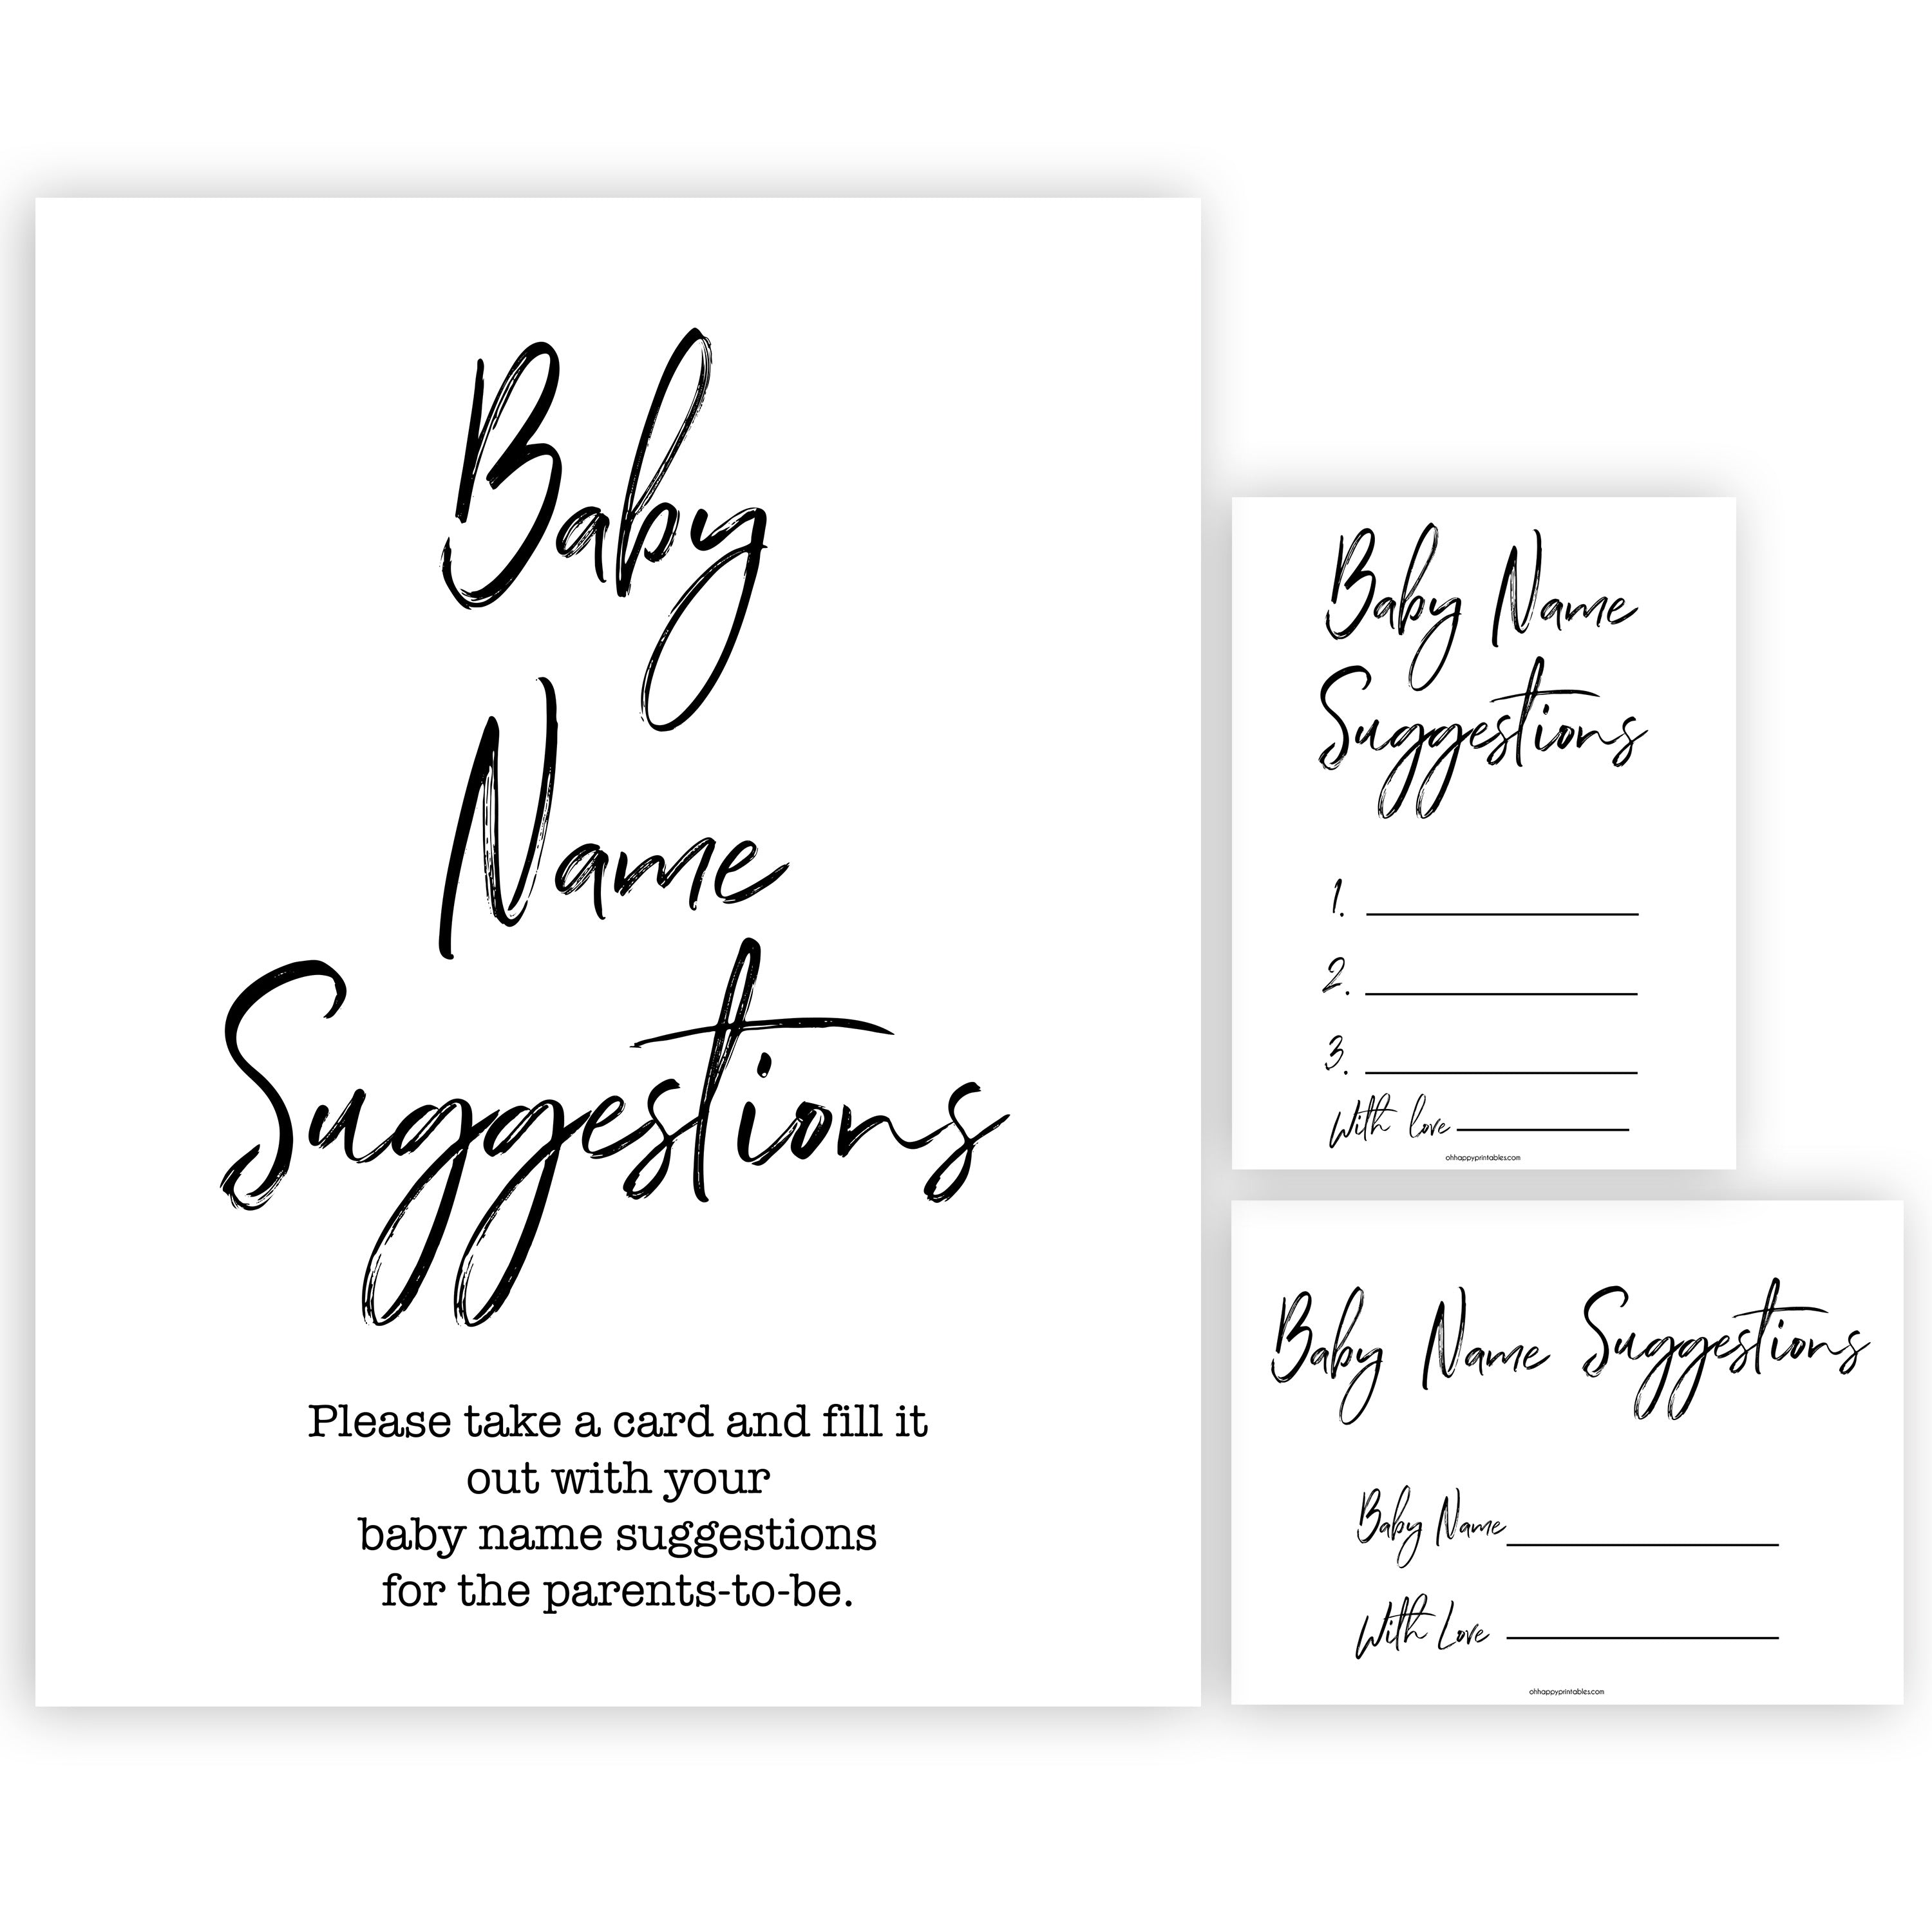 gender neutral baby shower games, baby name suggestions, baby games, printable baby shower, popular baby games, fun baby games, baby shower games